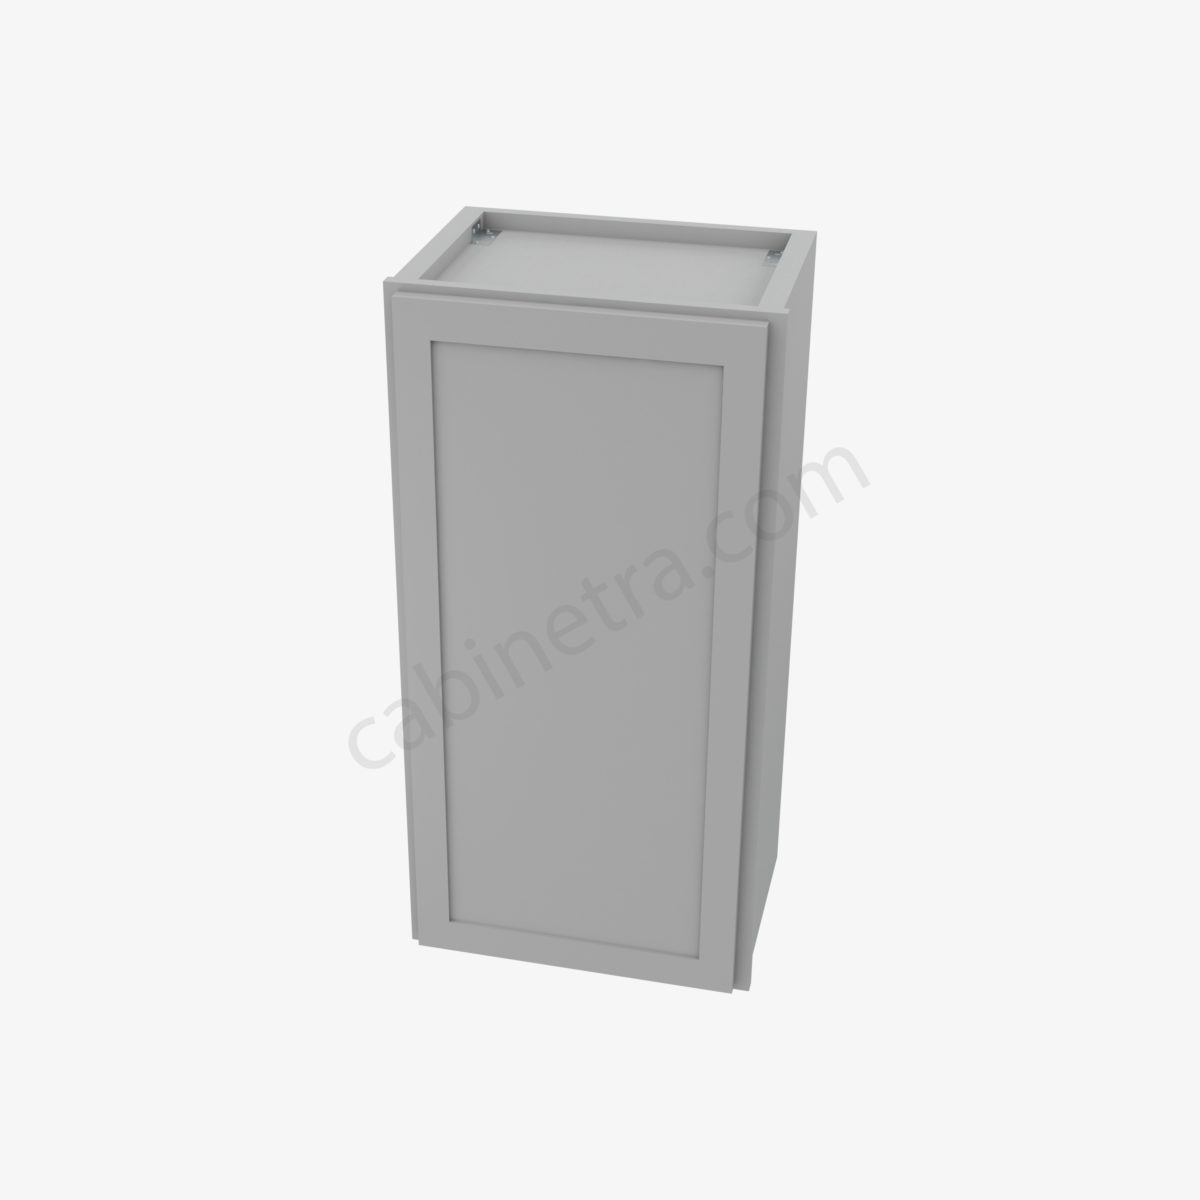 AB W1836 3 Forevermark Lait Gray Shaker Cabinetra scaled